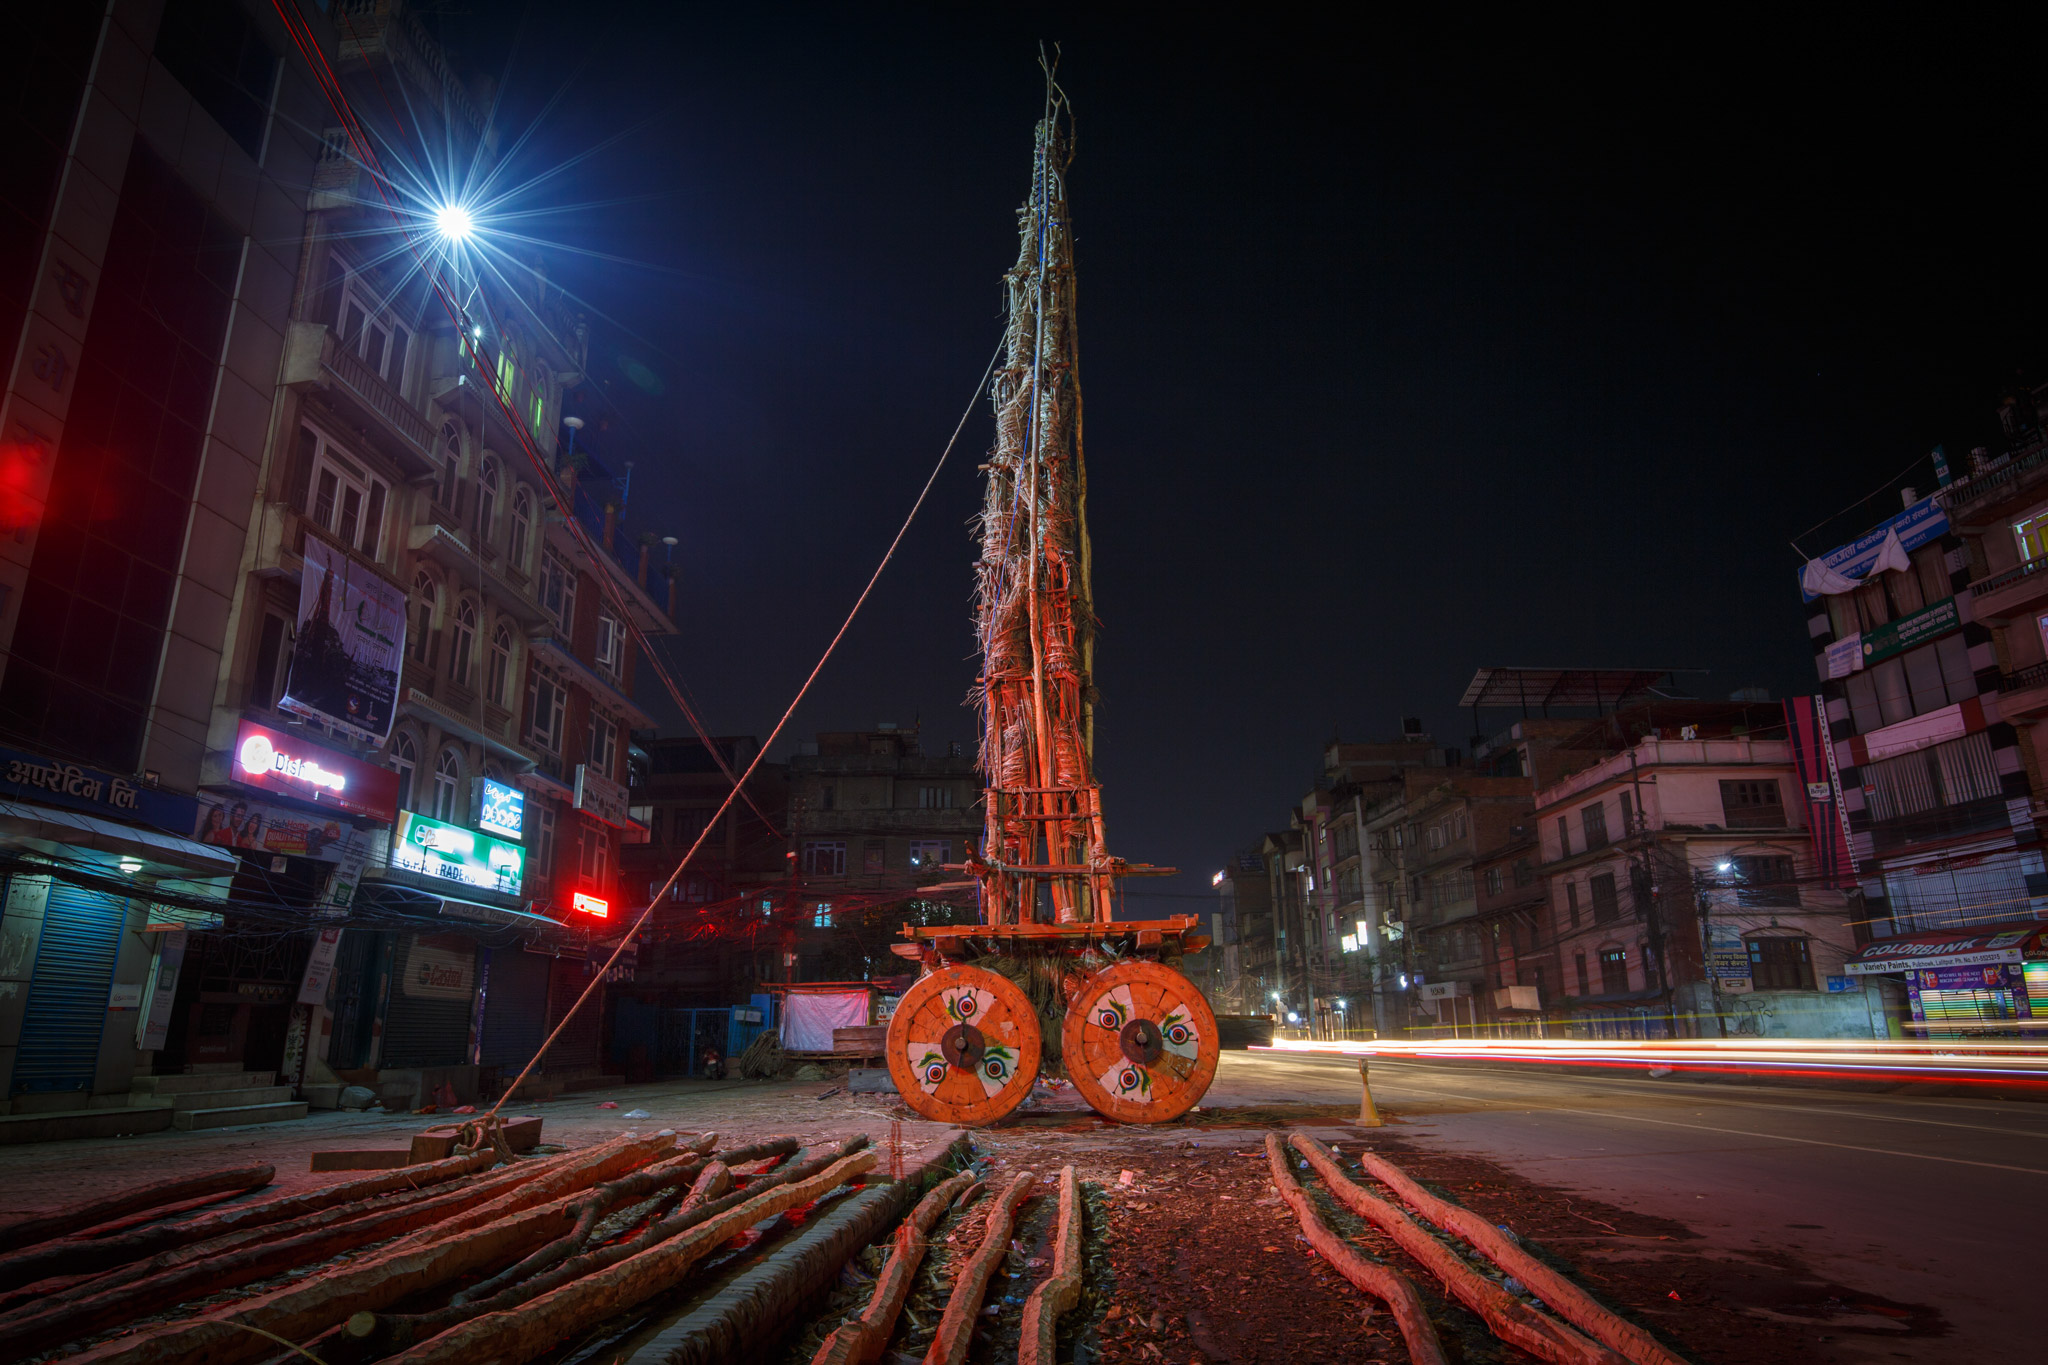 Tall spire made of textured materials rests on orange wheels beside city street at nighttime